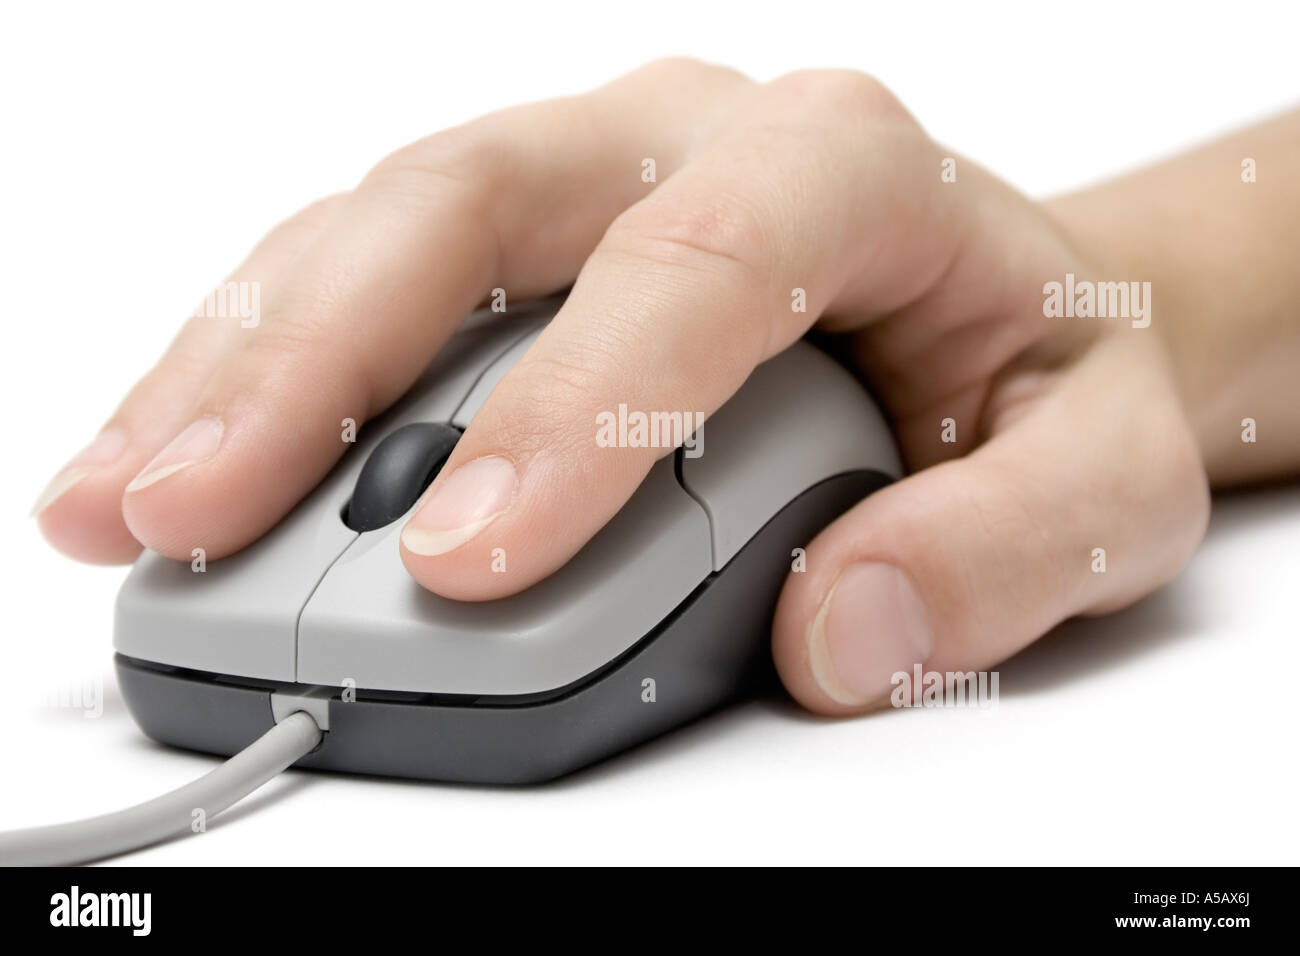 Female hand using a grey computer mouse. Isolated on white background. Stock Photo